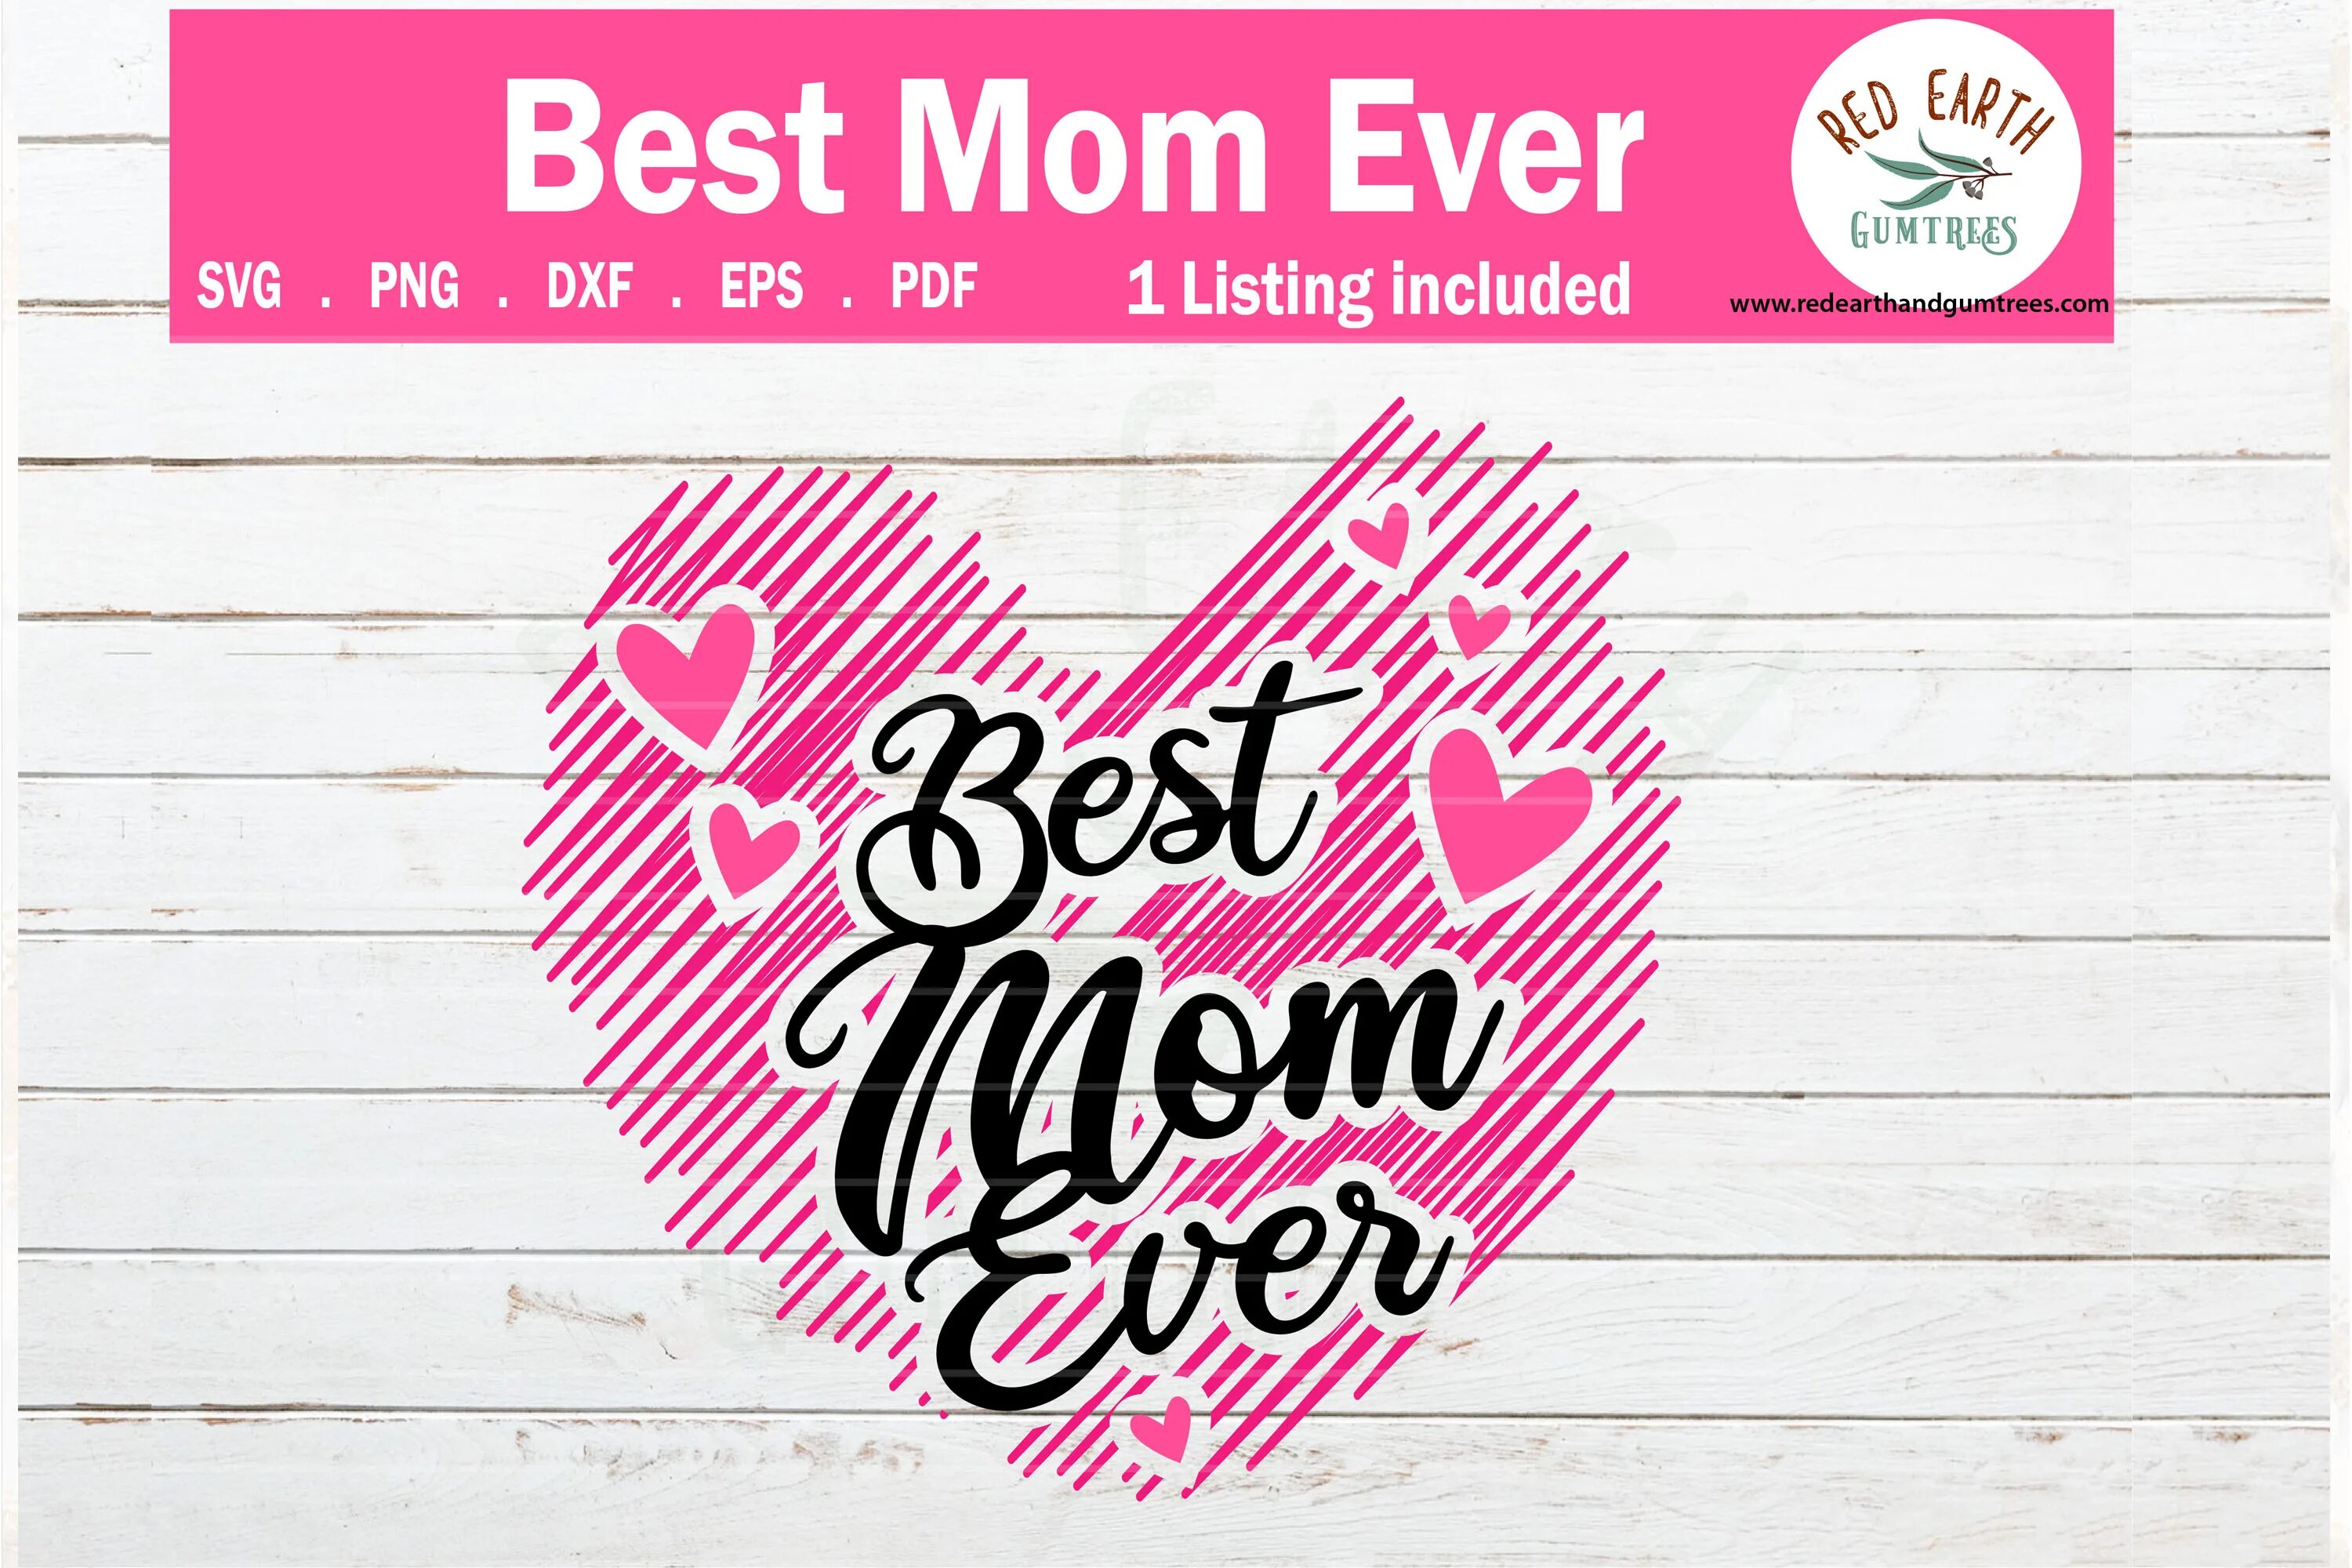 Best mother. Best mom ever. Best mom картинки. Best mom ever PNG. For the best mom перевод.